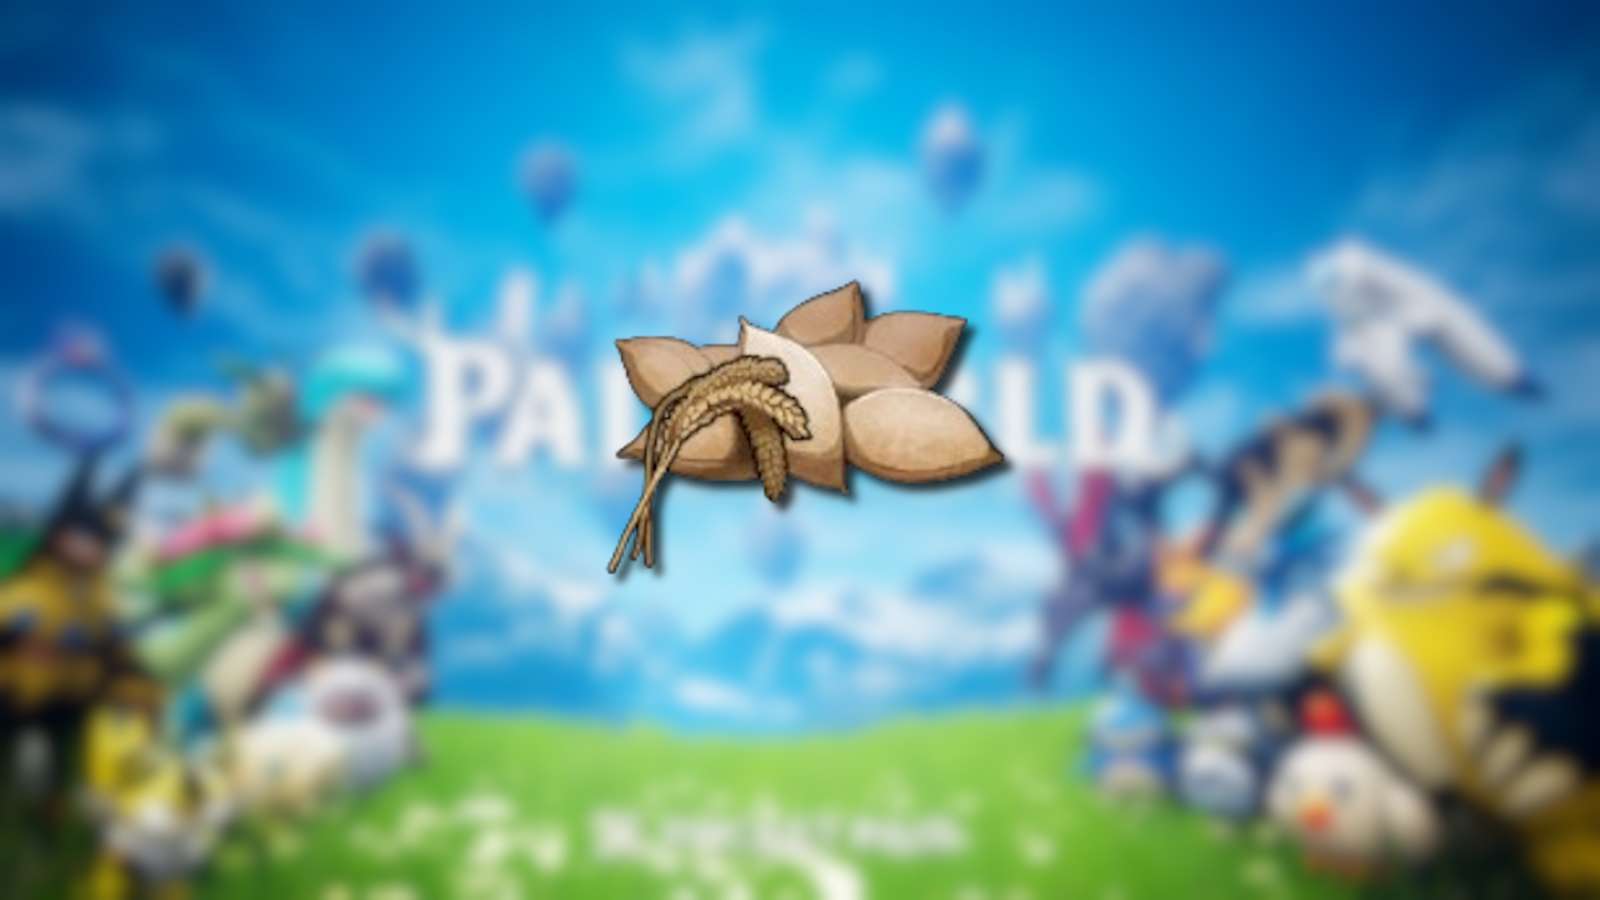 Wheat seeds in front of palworld promo art.